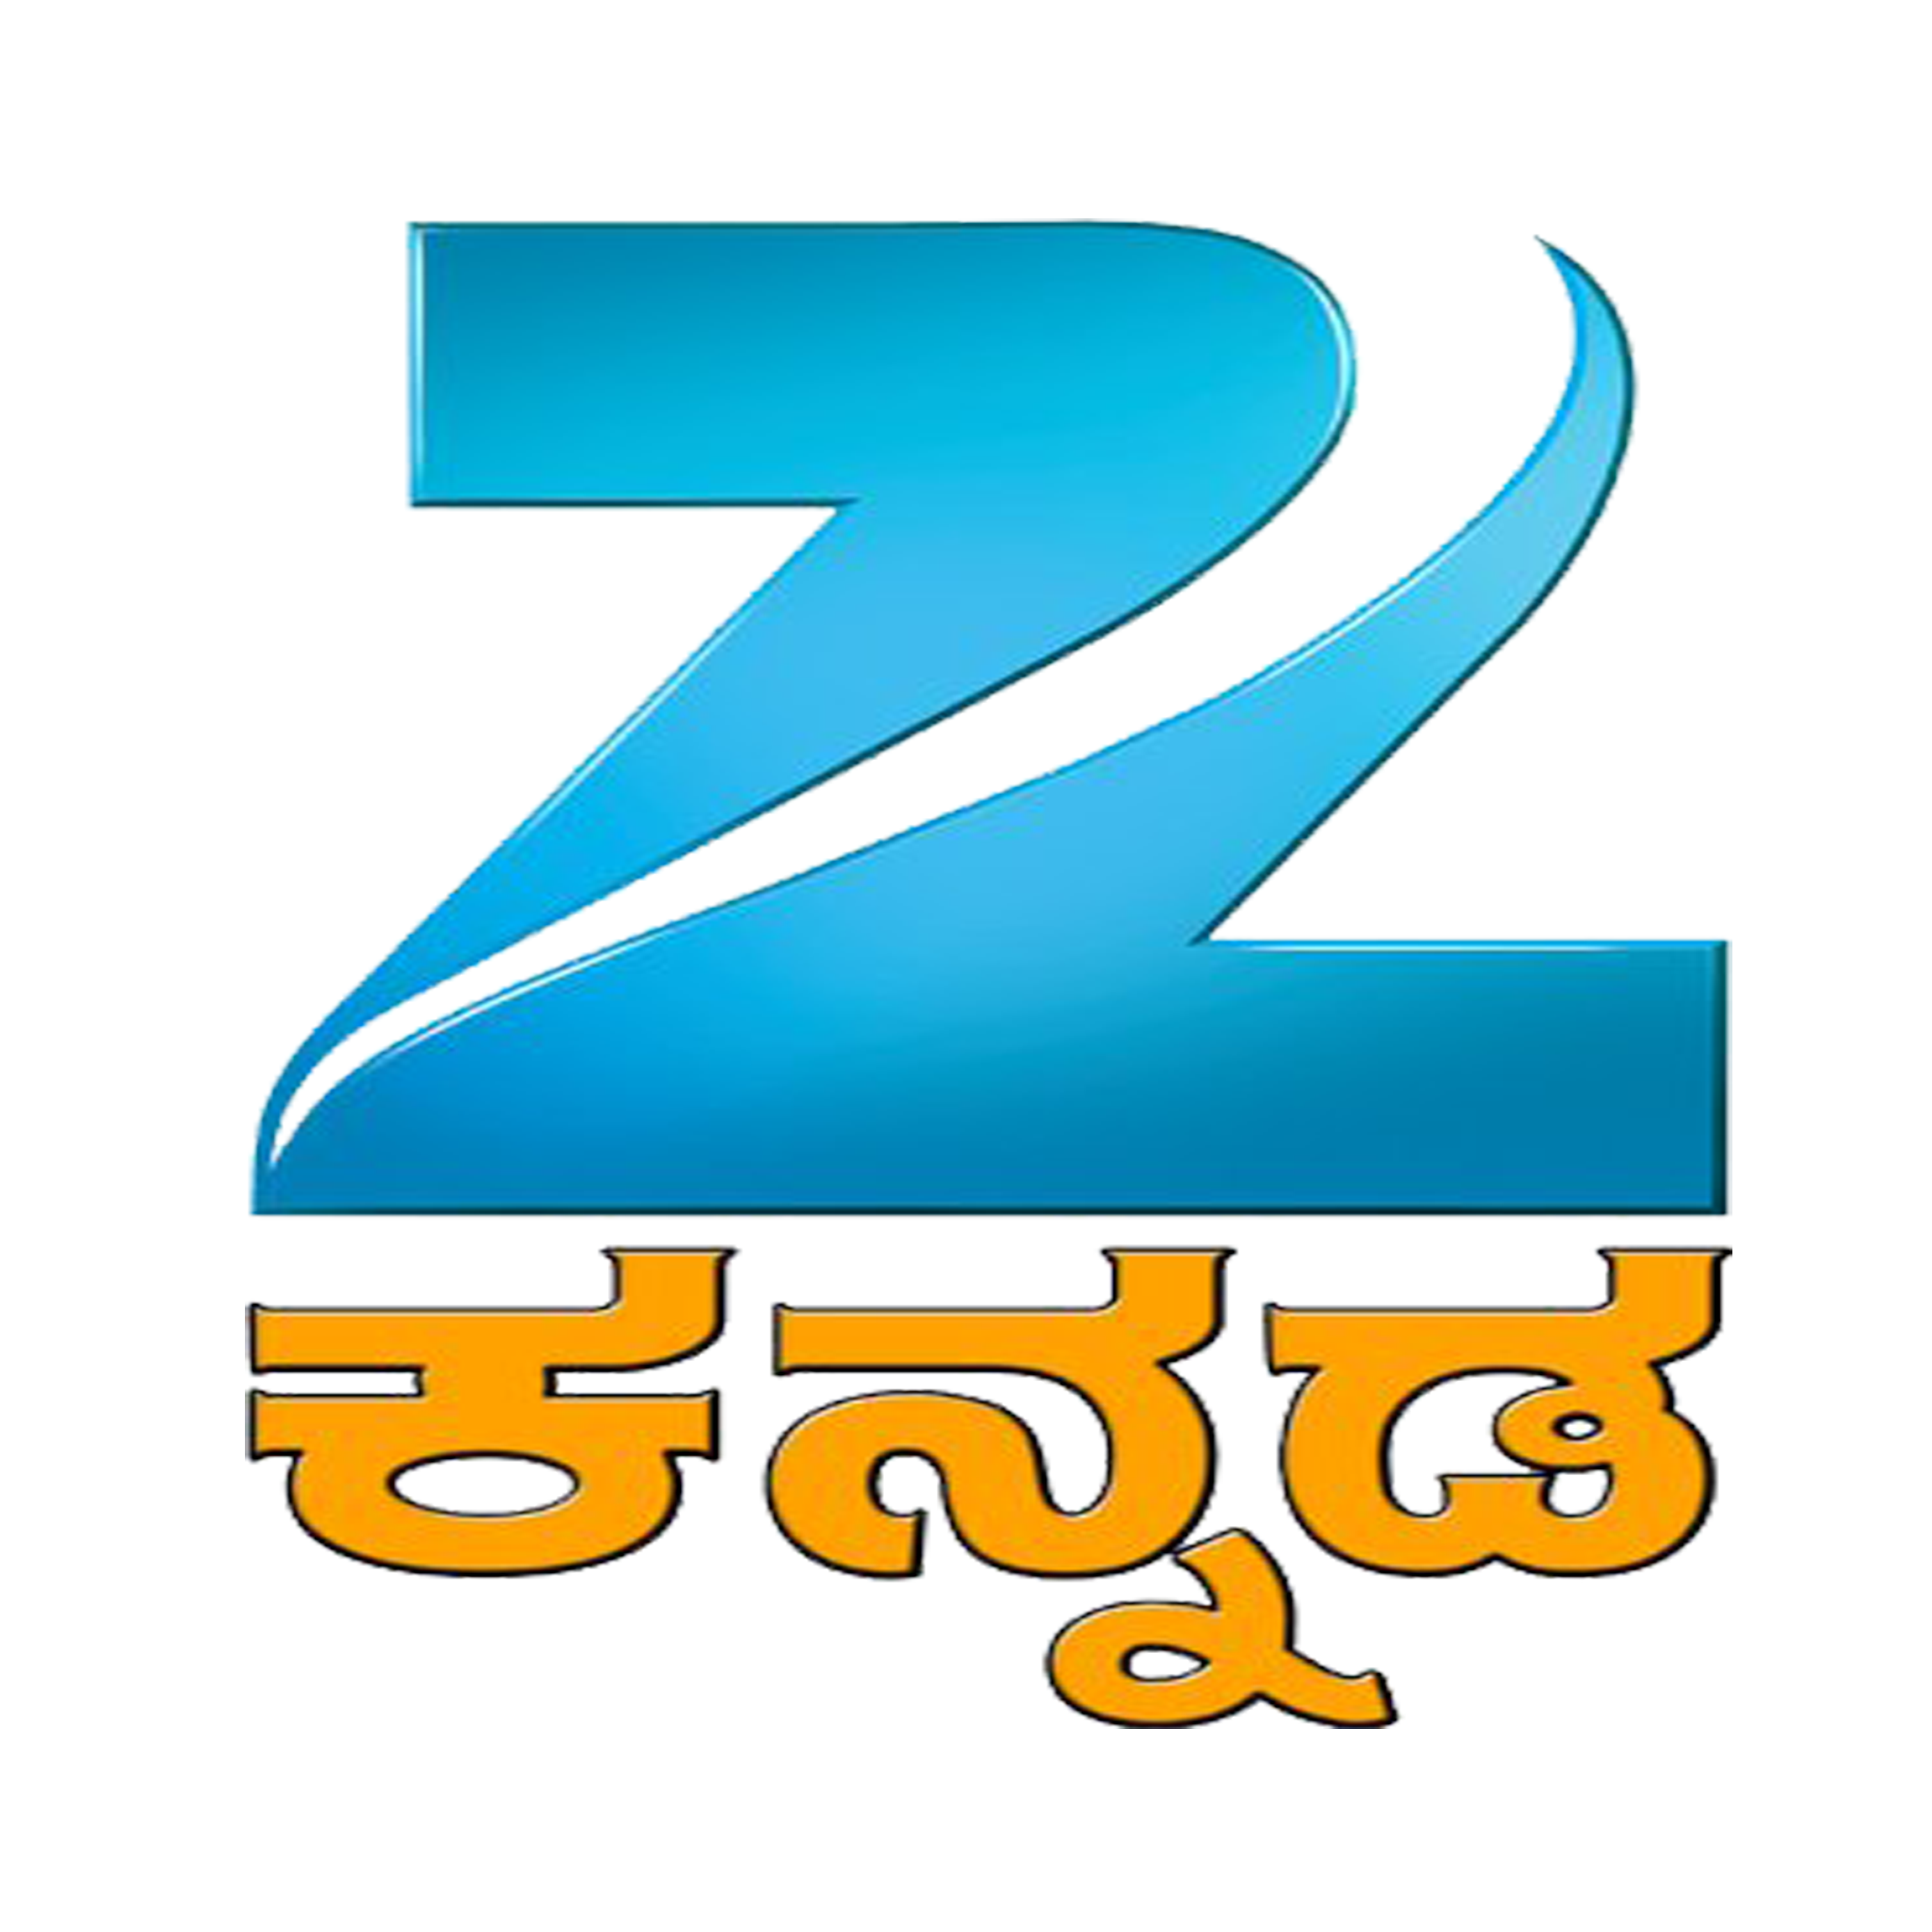 zee tv download for pc